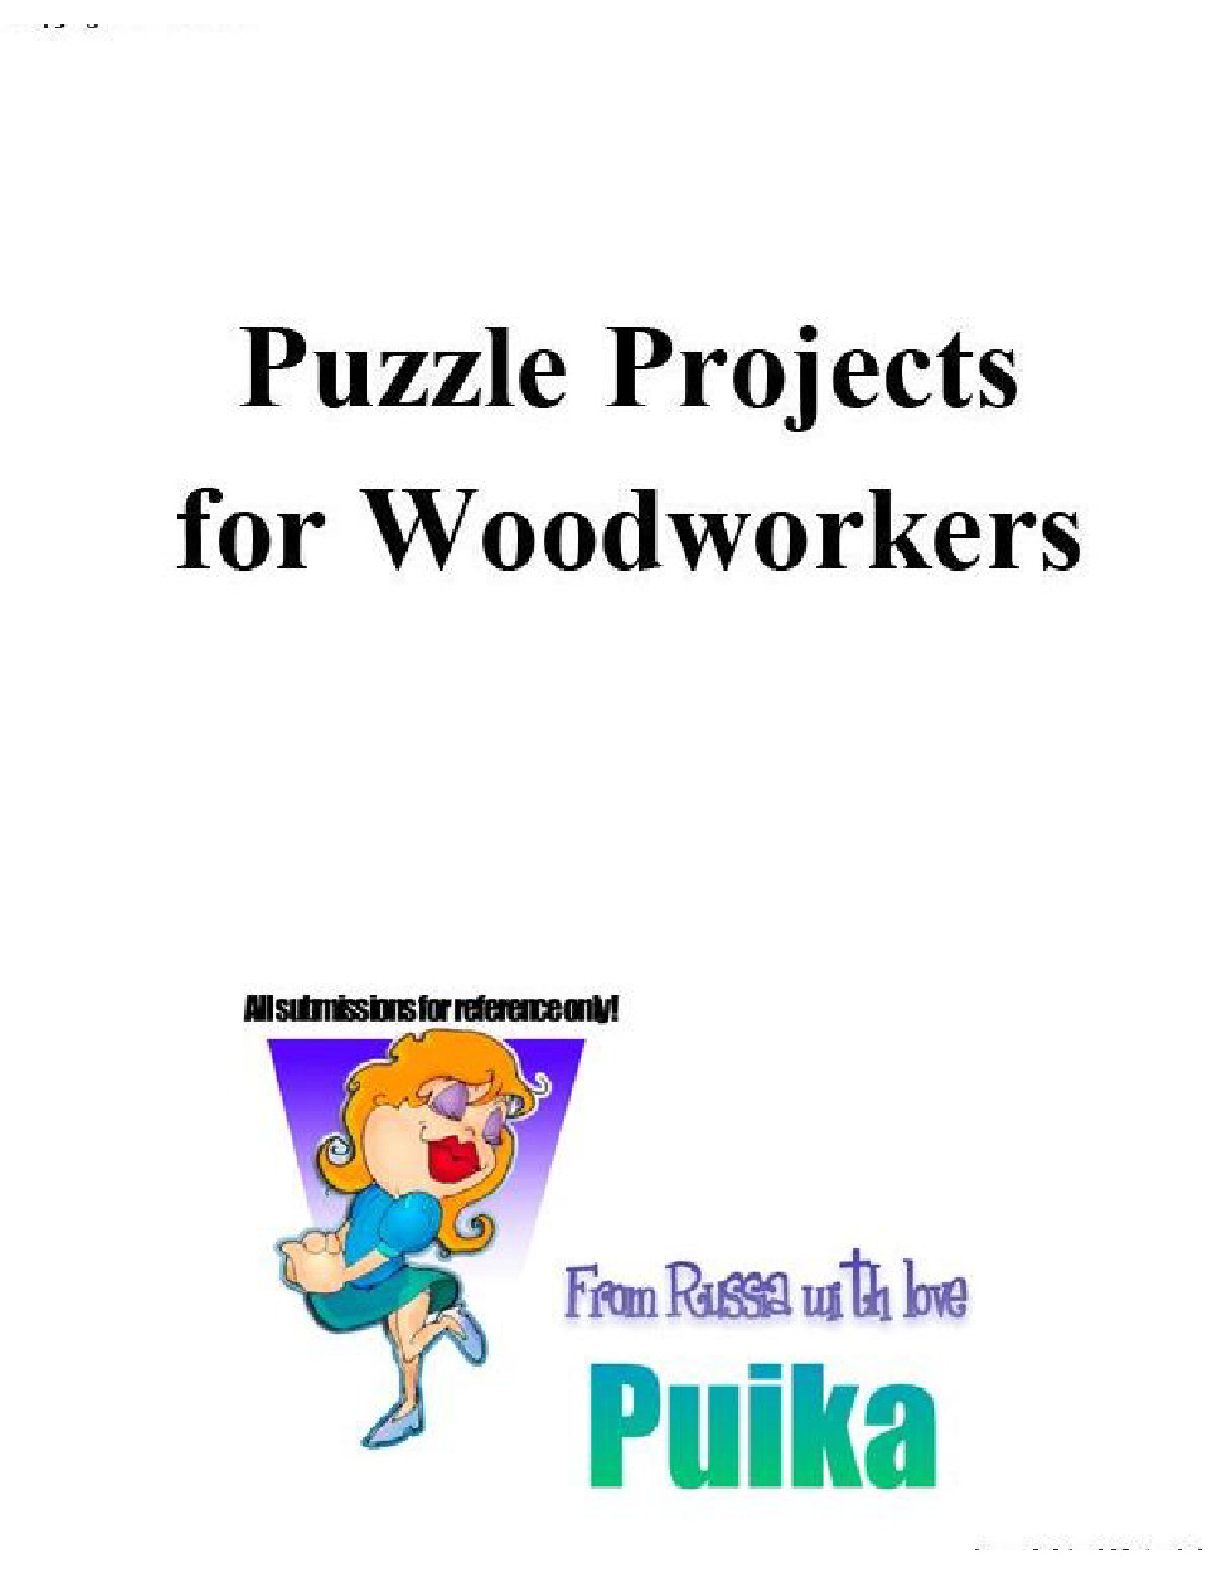 Puzzle Projects for Woodworkers 2007_益智项目木材